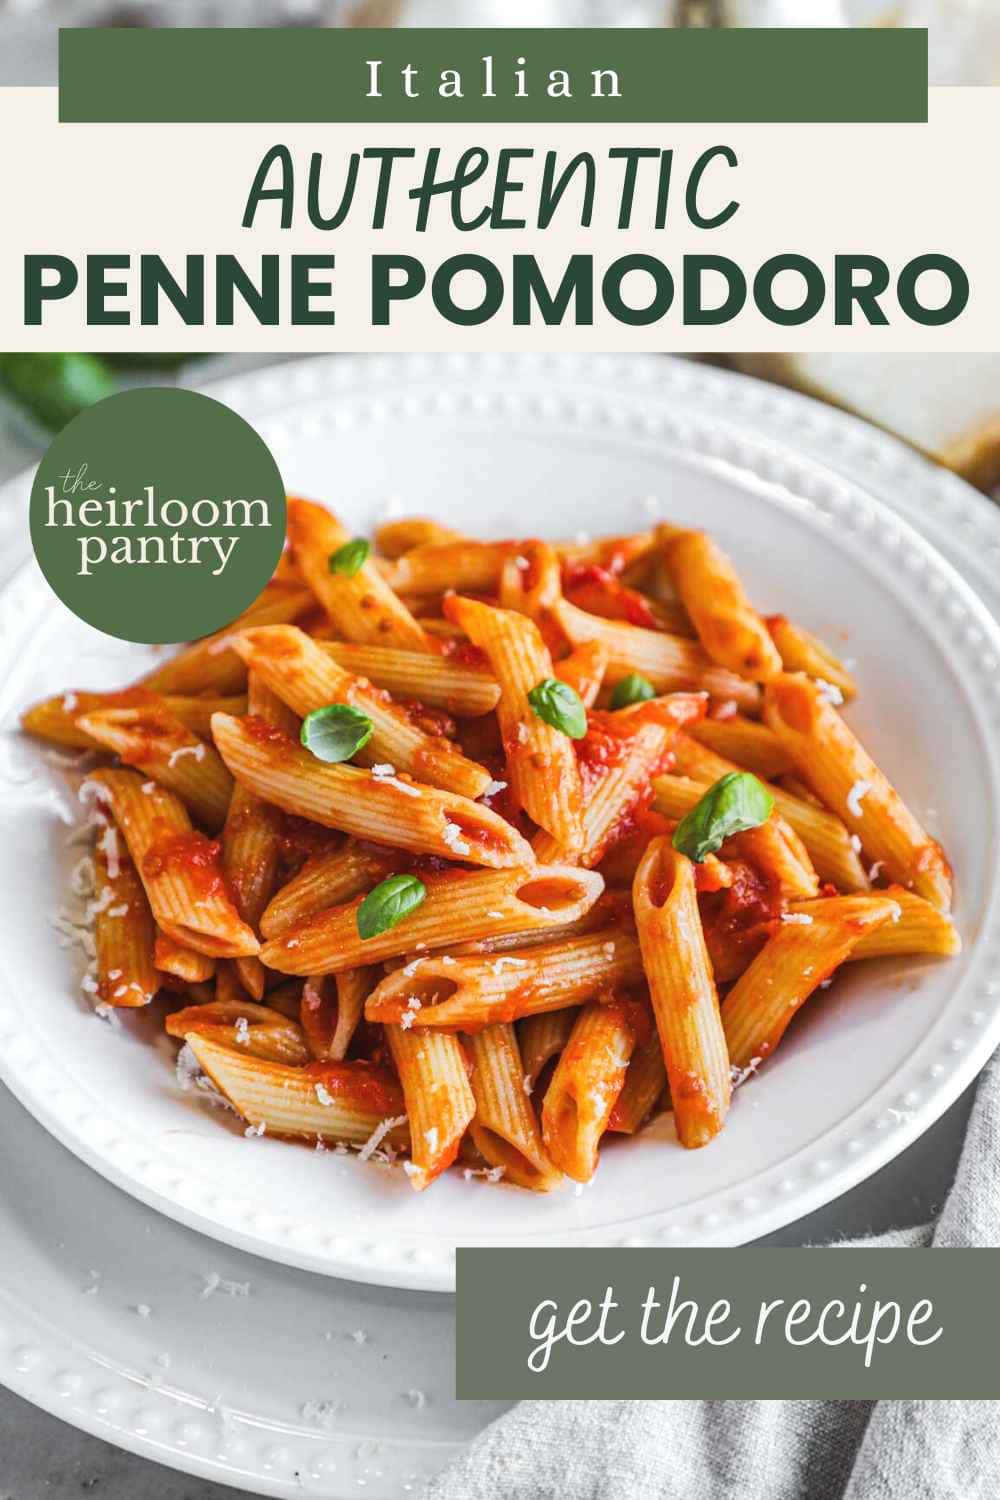 Authentic 25-minute penne pomdoro Pinterest pin.